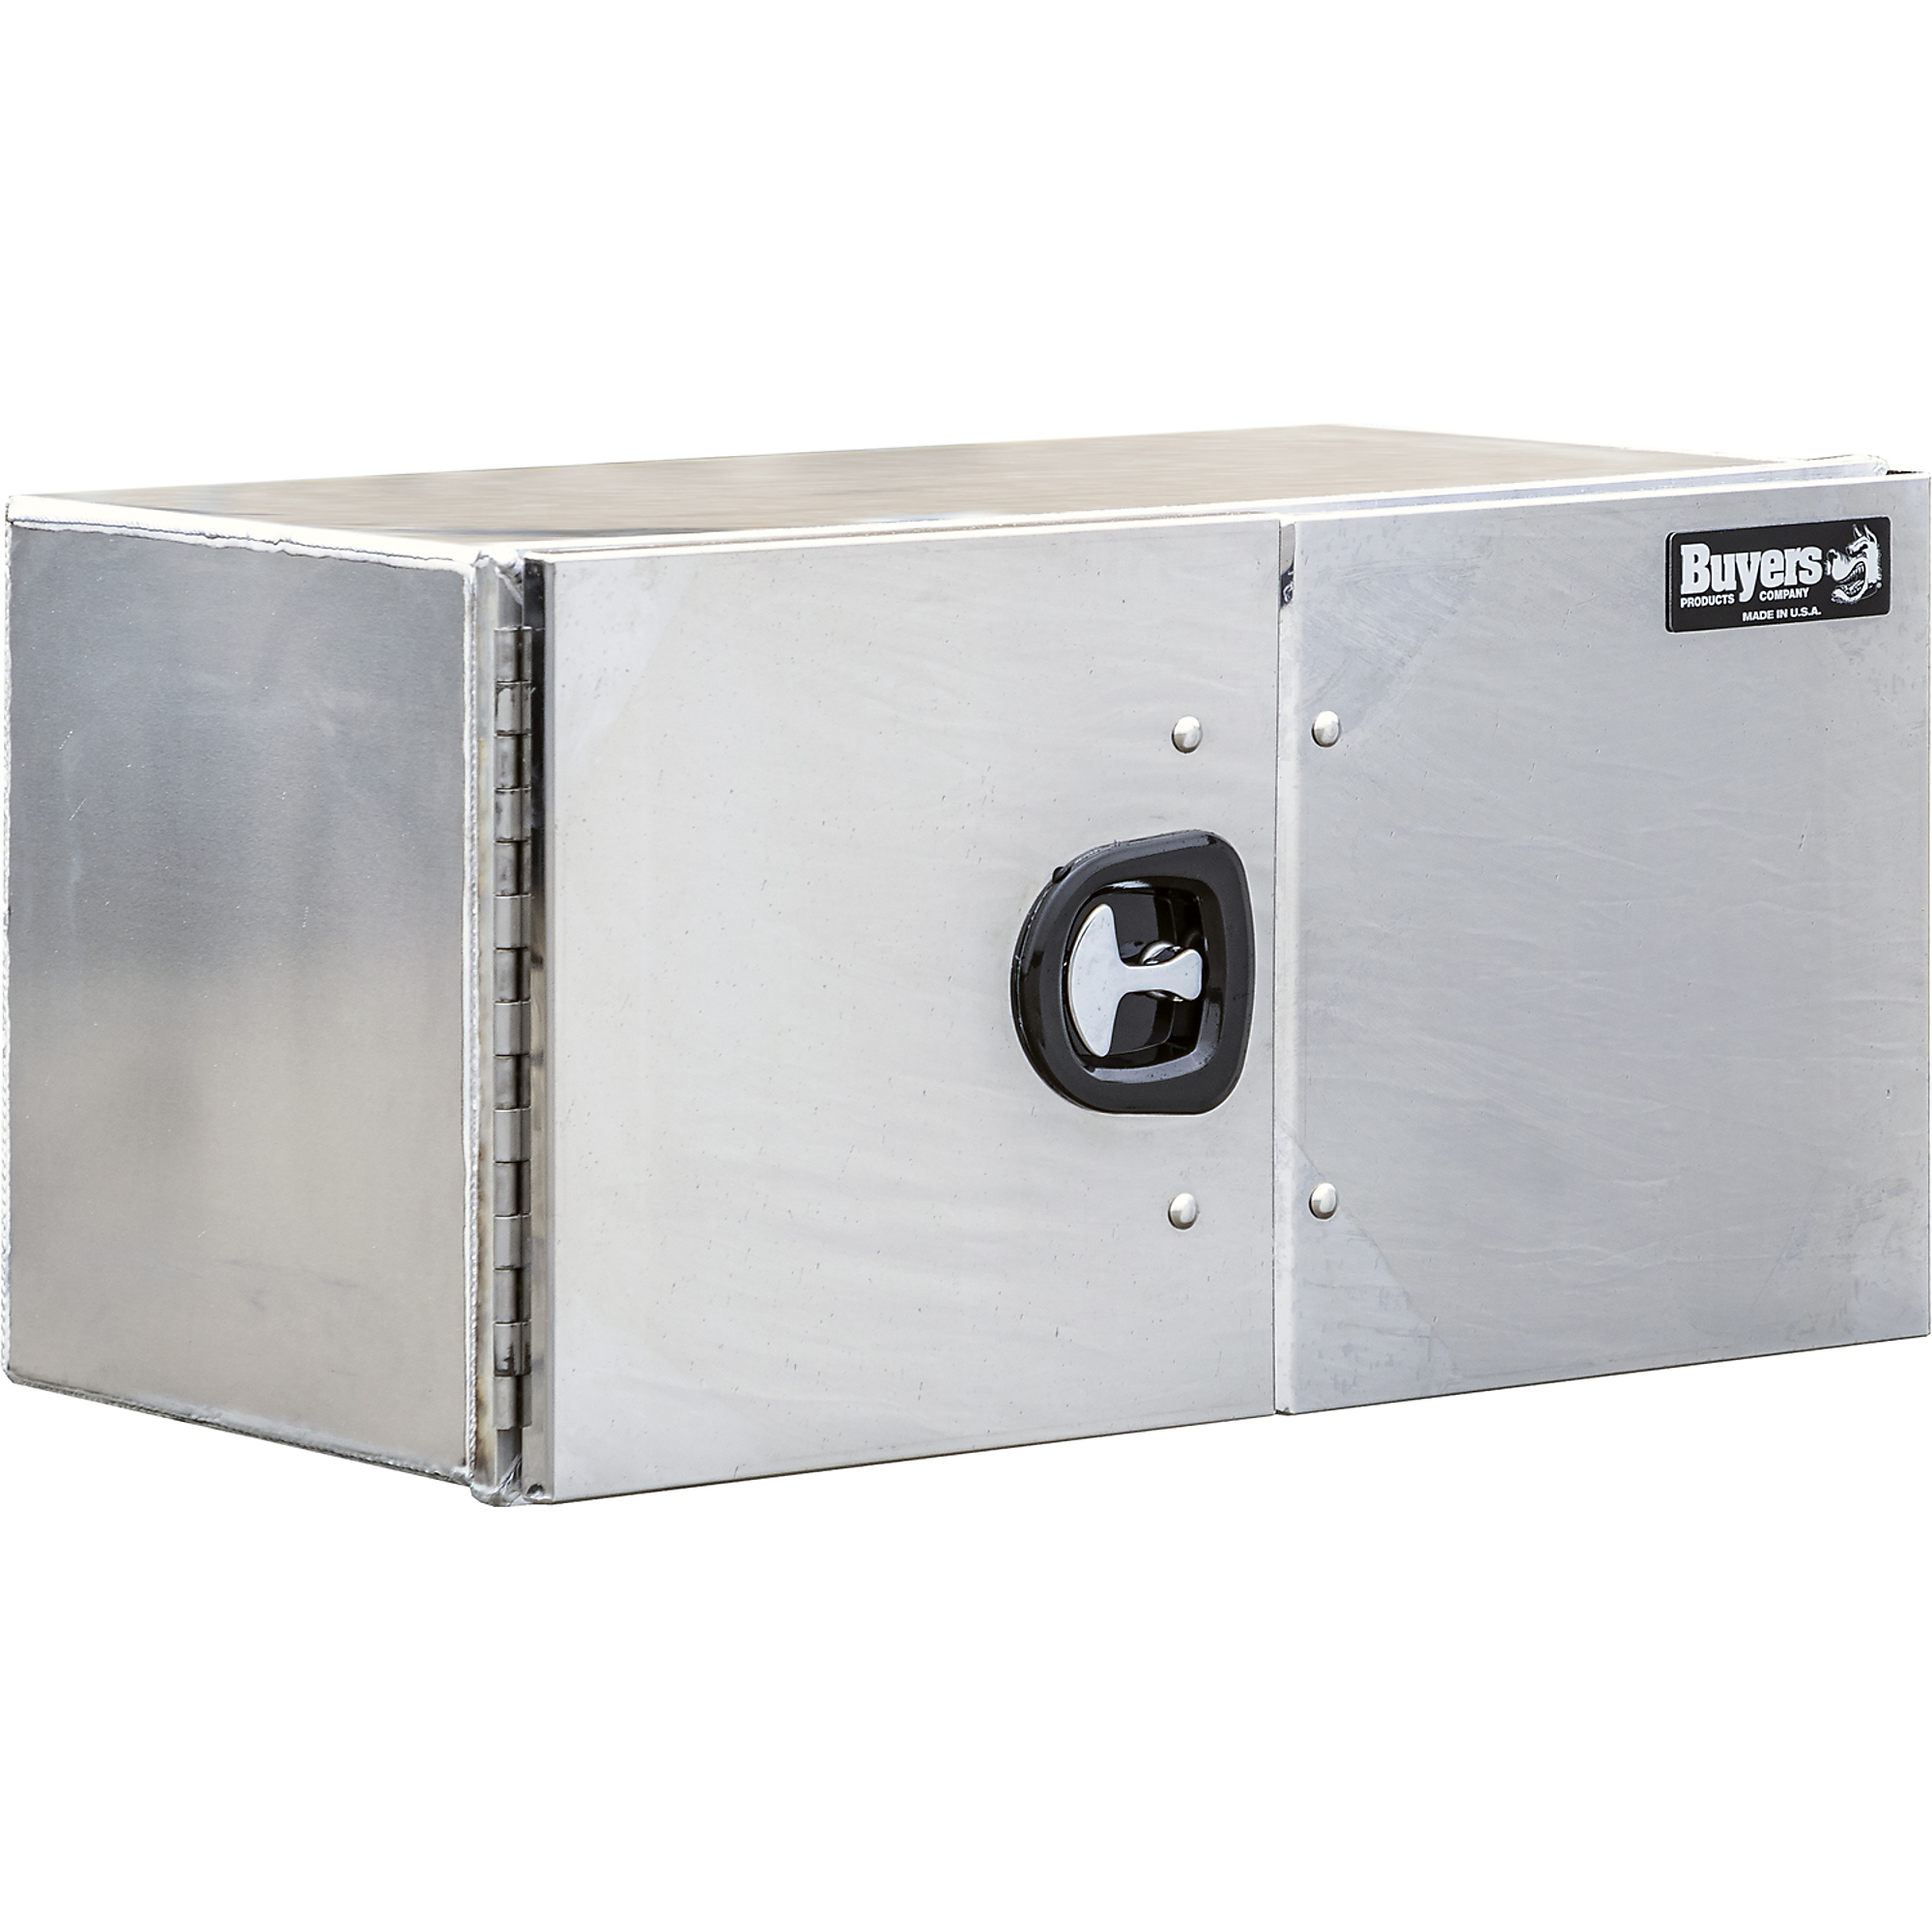 Buyers Products, 18x18x60 Aluminum Barn Door Underbody Truckbox, Width 18 in, Material Aluminum, Color Finish Smooth Silver, Model 1705520